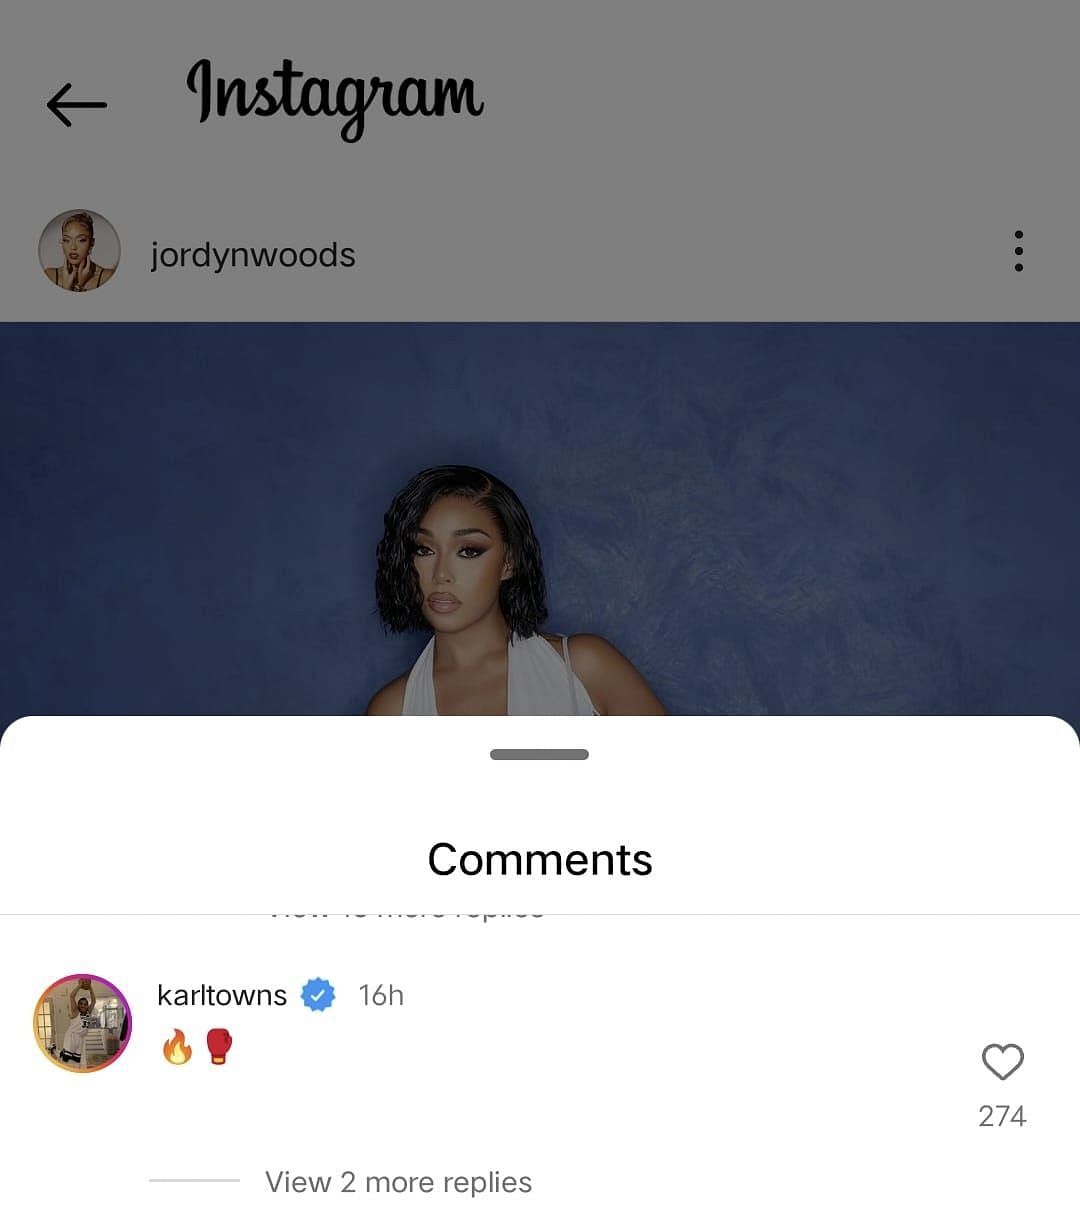 Karl-Anthony Towns&#039; comment on Jordyn&#039;s photo